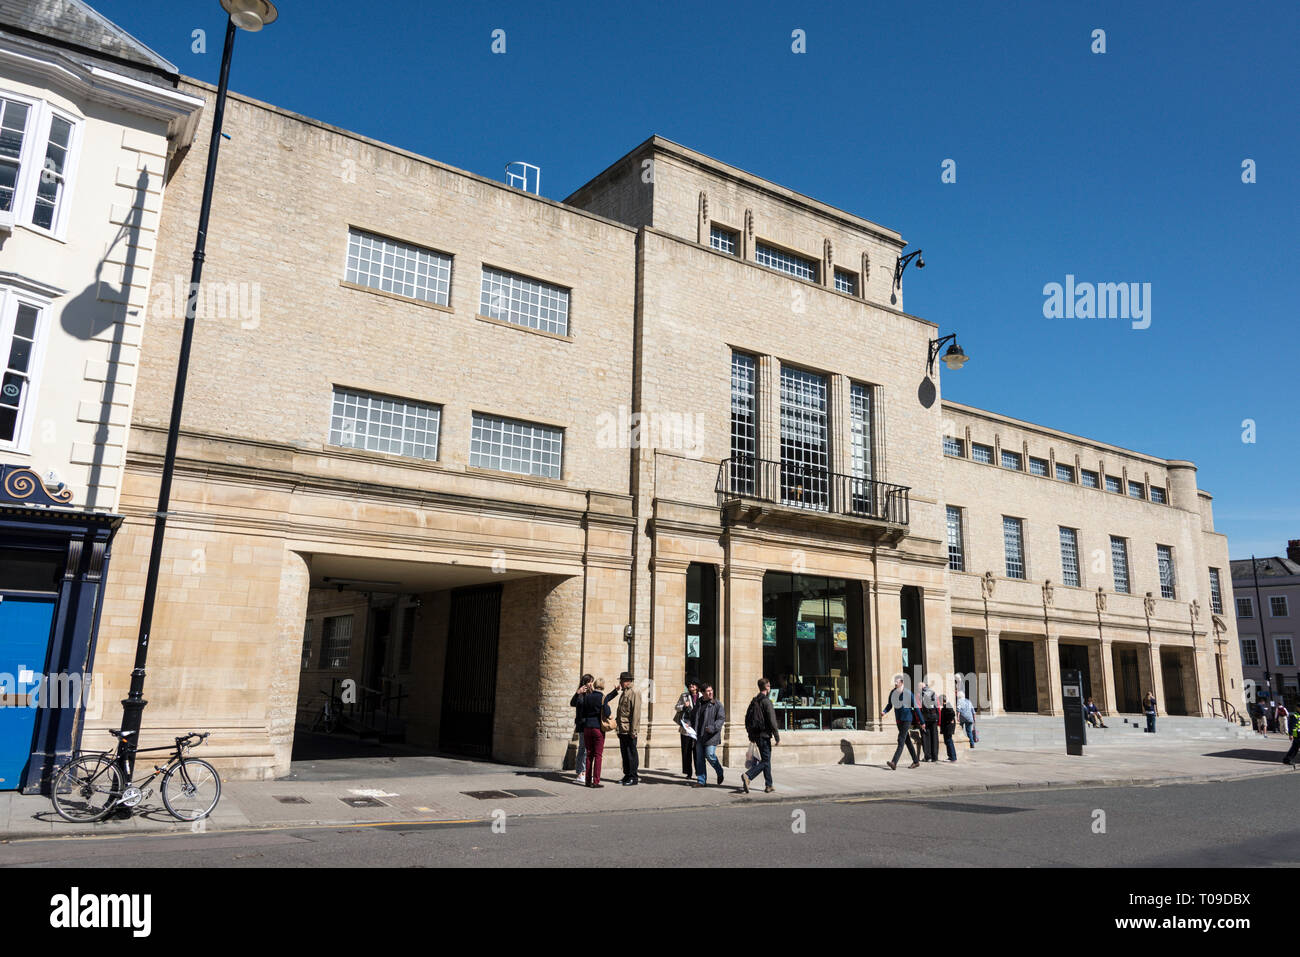 The Weston Library is part of the Bodleian Library, the main research library of the University of Oxford in Broad Street in Oxford, Oxfordshire, Brit Stock Photo